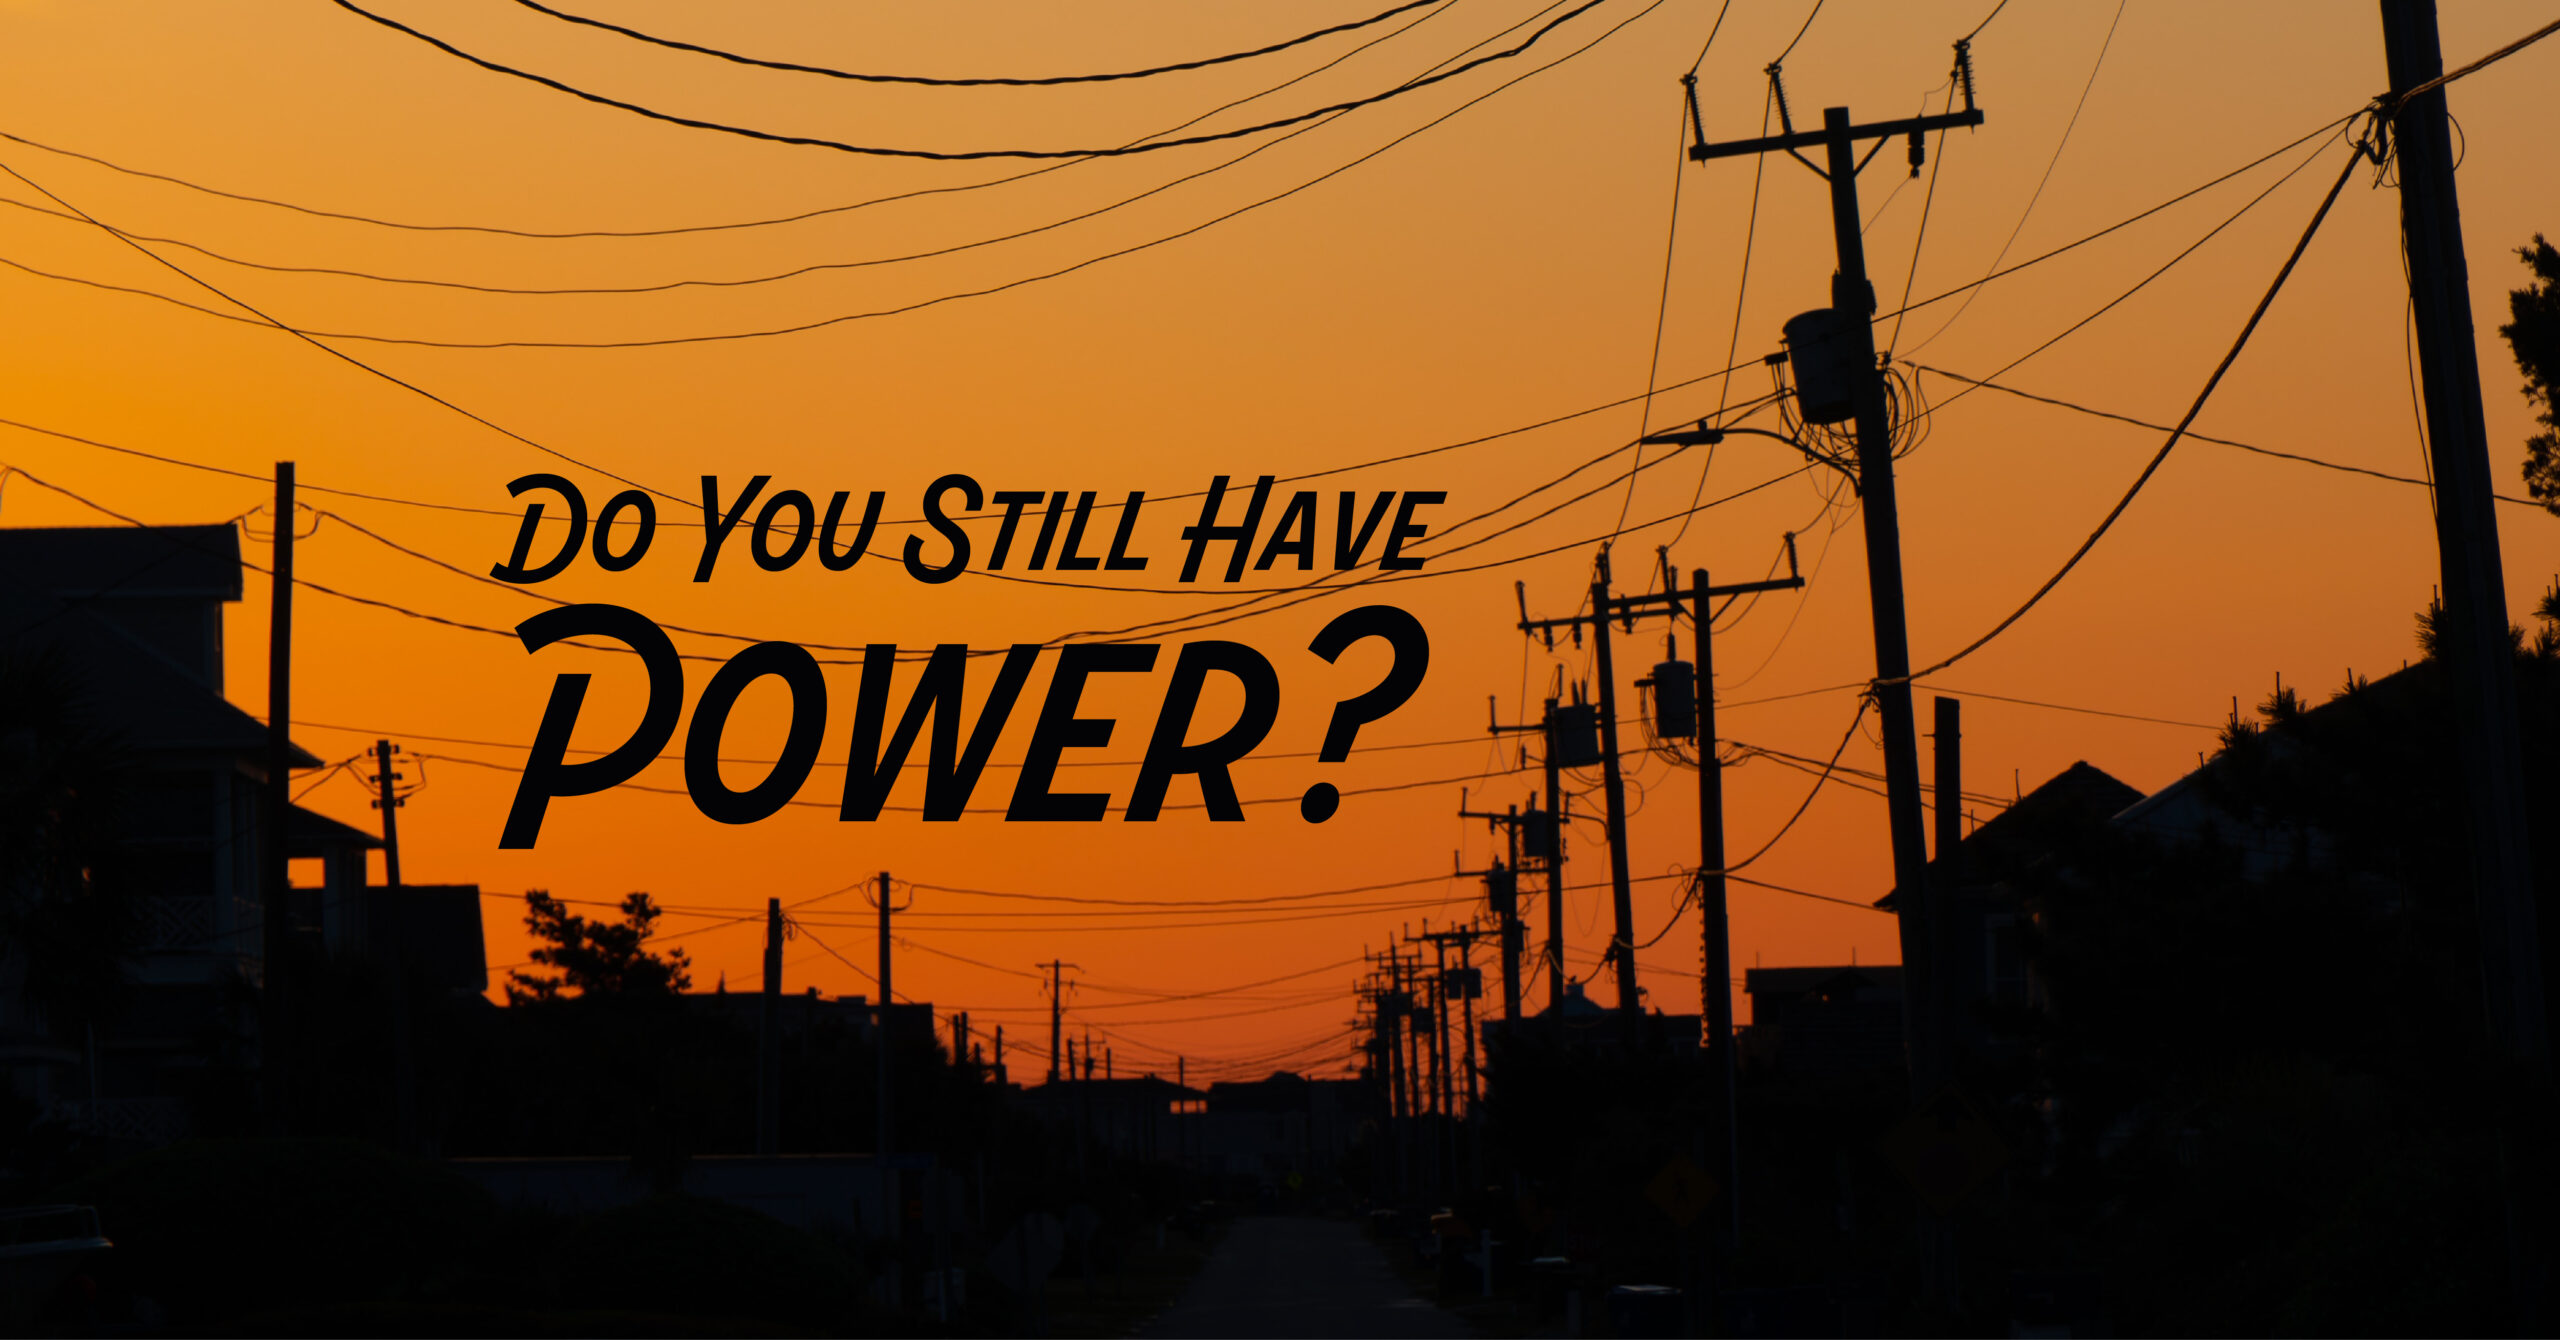 Do you still have power?